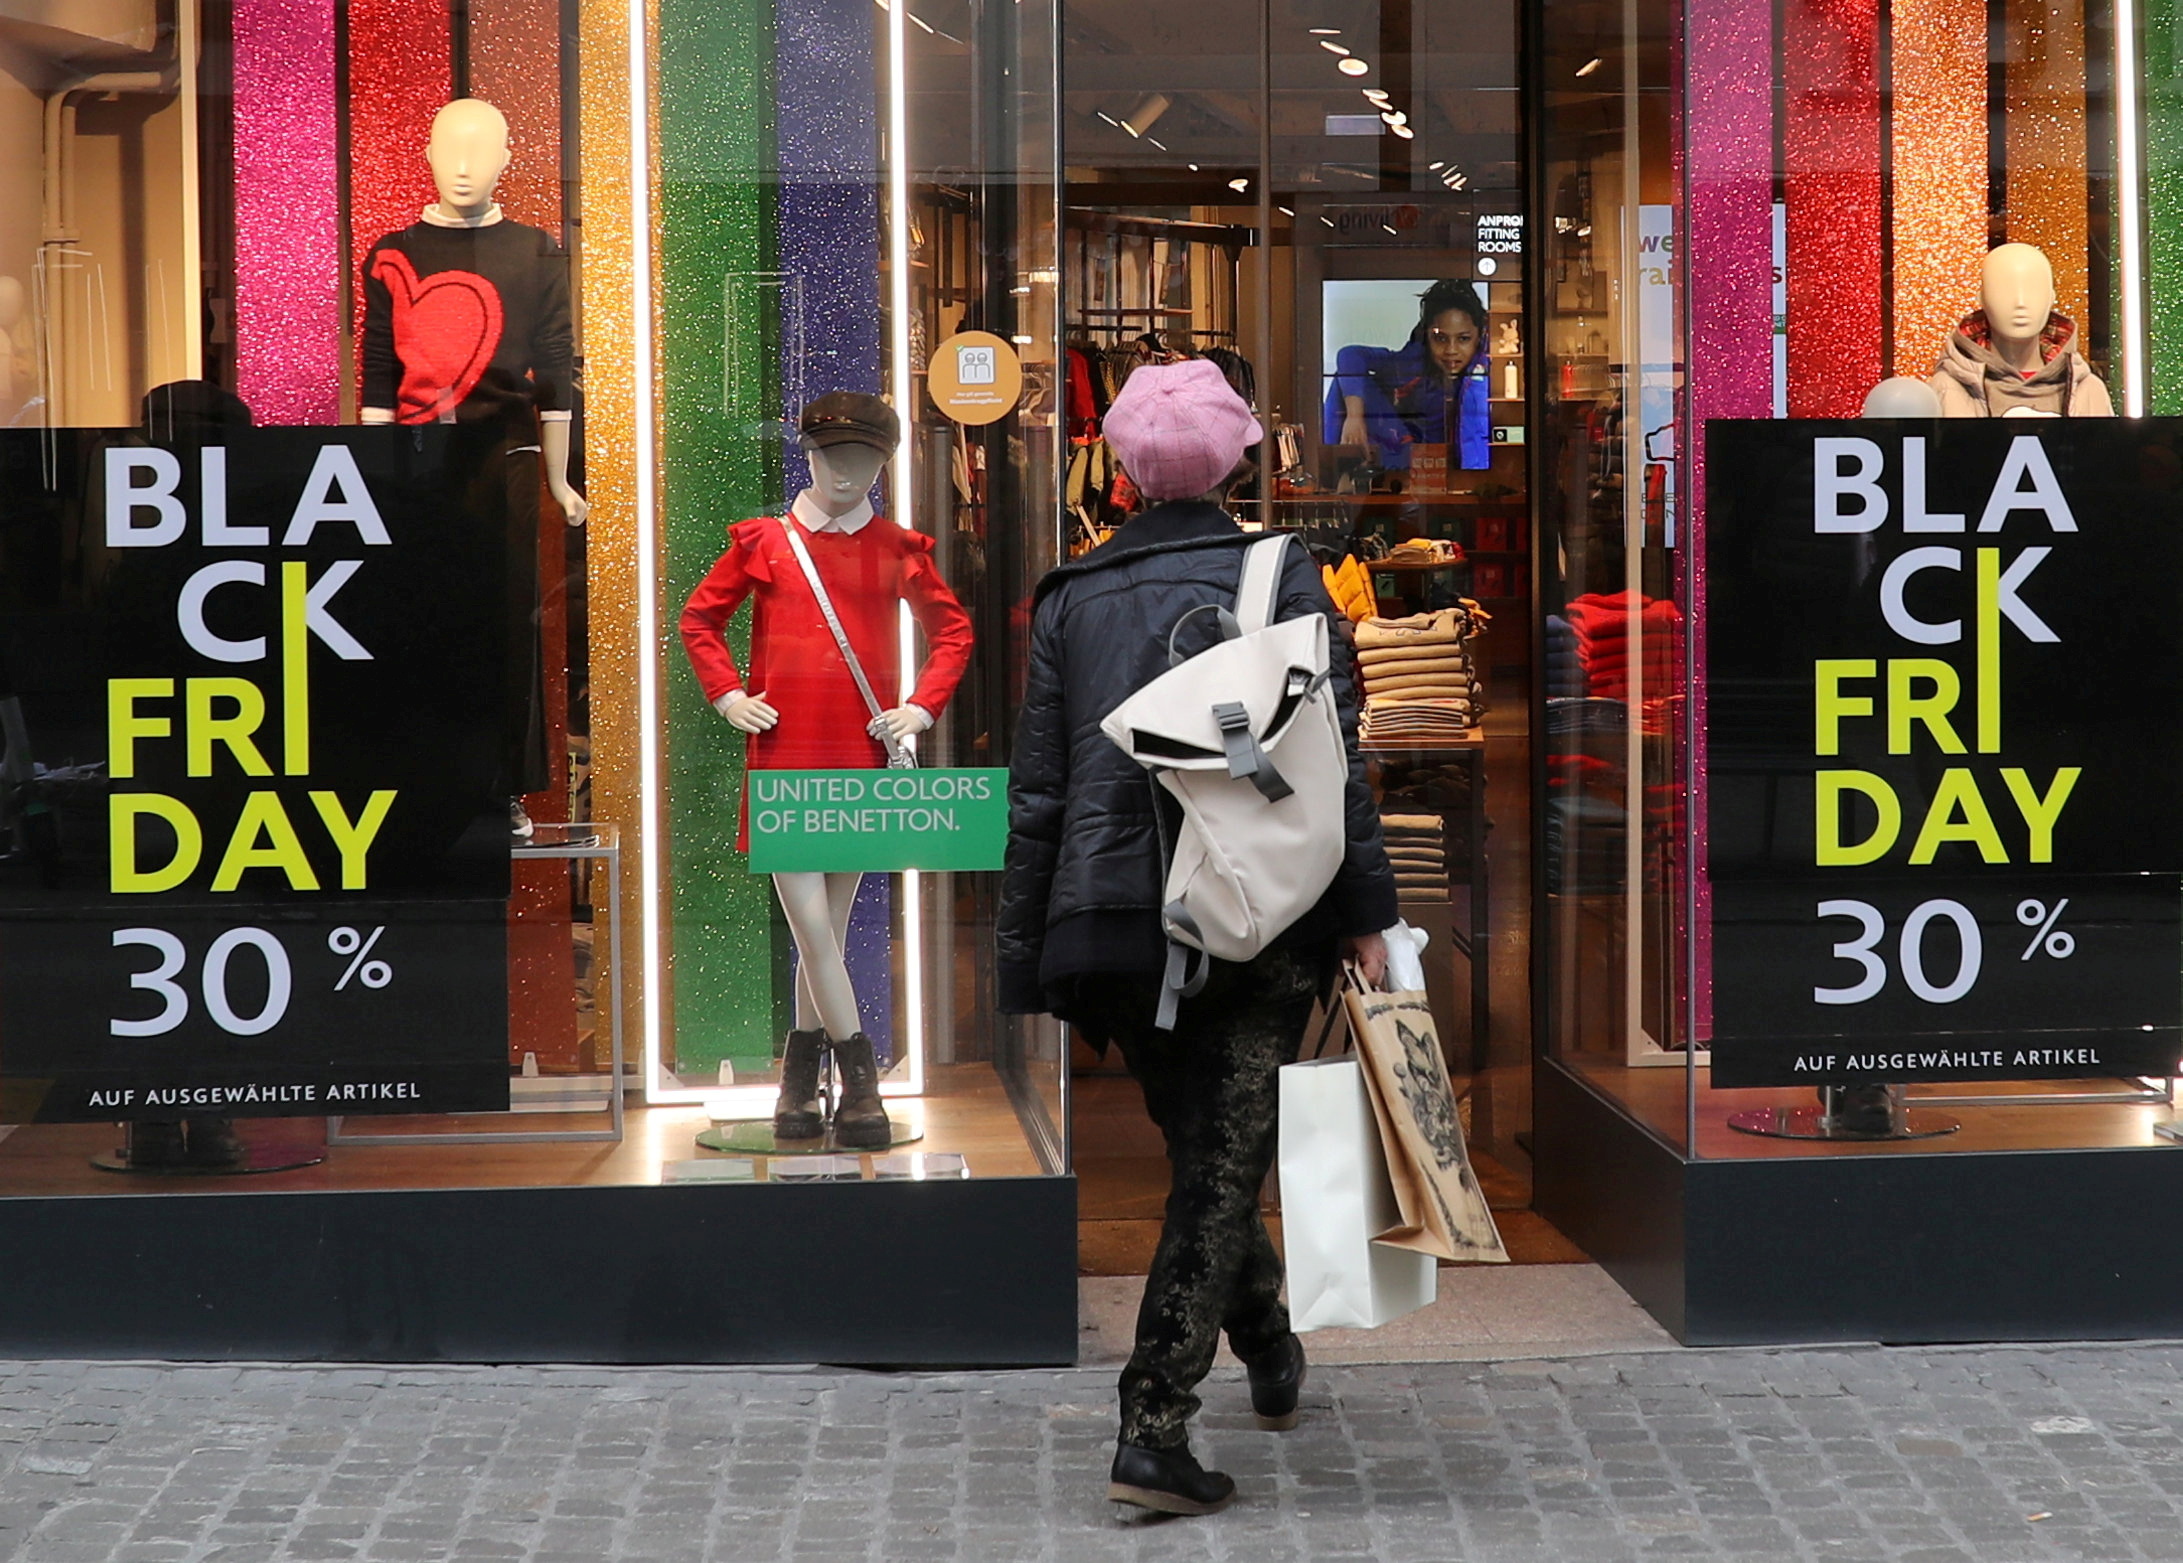 Posters offering special discount on Black Friday sales are seen in front of a United Colors of Benetton kid's fashion store in Zurich